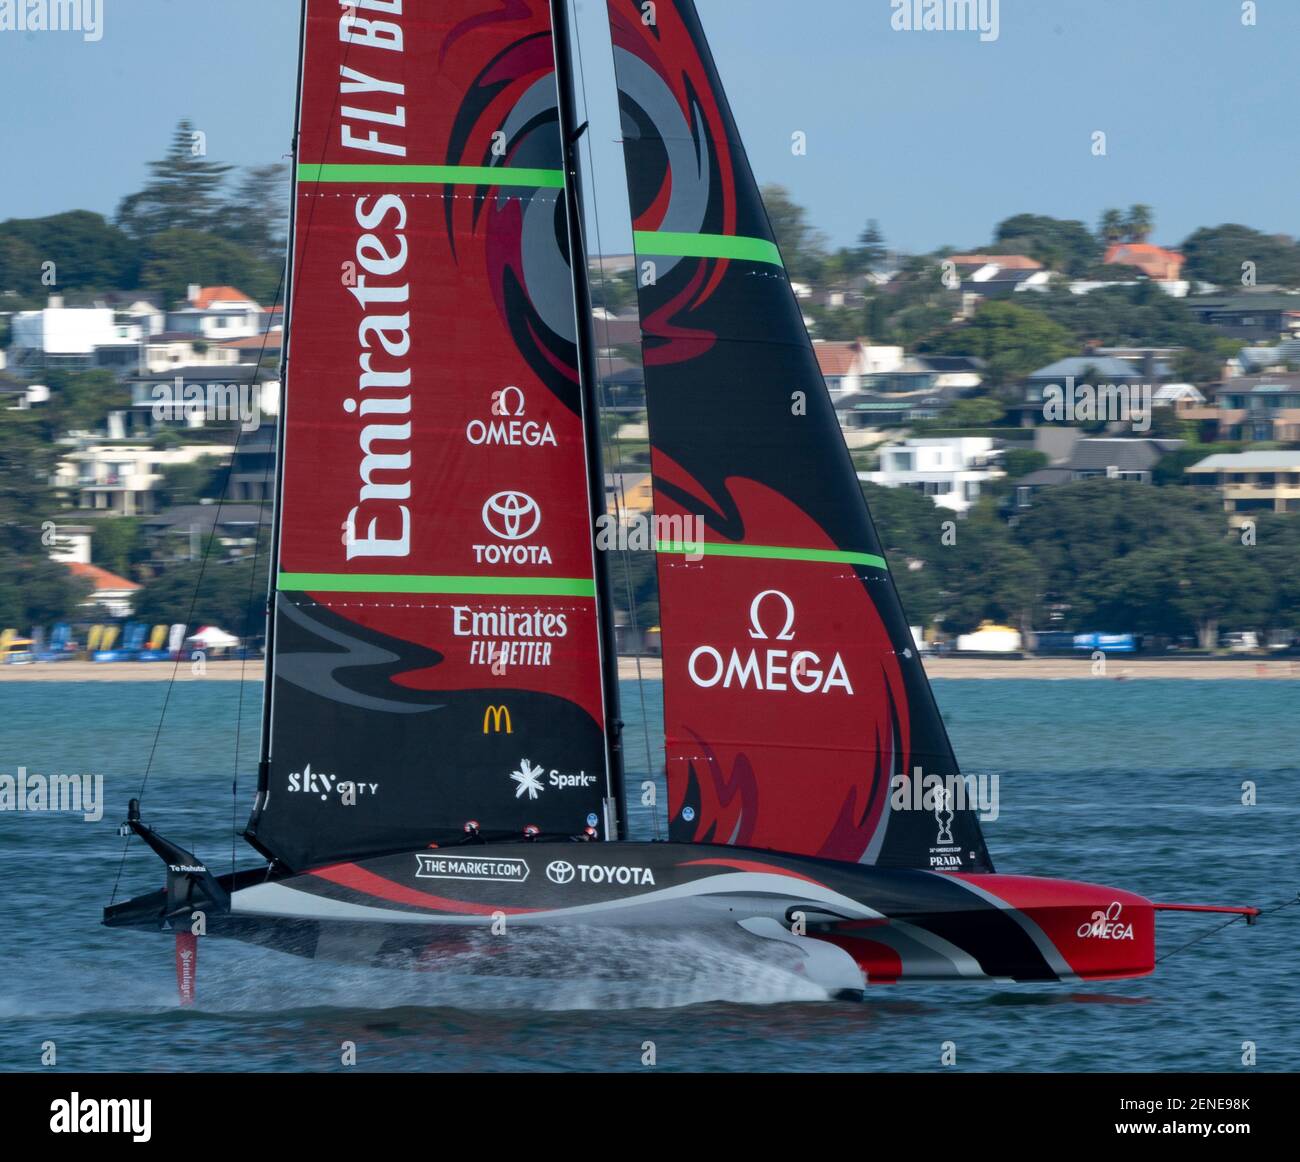 Auckland, New Zealand, 26 February, 2021 -  Emirates Team New Zealand's Te Rehutai, skippered by Peter Burling,  speeds through the Waitemata Harbour during a training session ahead of their America's Cup clash with the Italian team Luna Rossa Prada Pirelli in the America's Cup starting on March 6. There are expectations that the foiling AC75 class yachts will break the 100kmh speed barrier during the competition. Credit: Rob Taggart/Alamy Live News Stock Photo